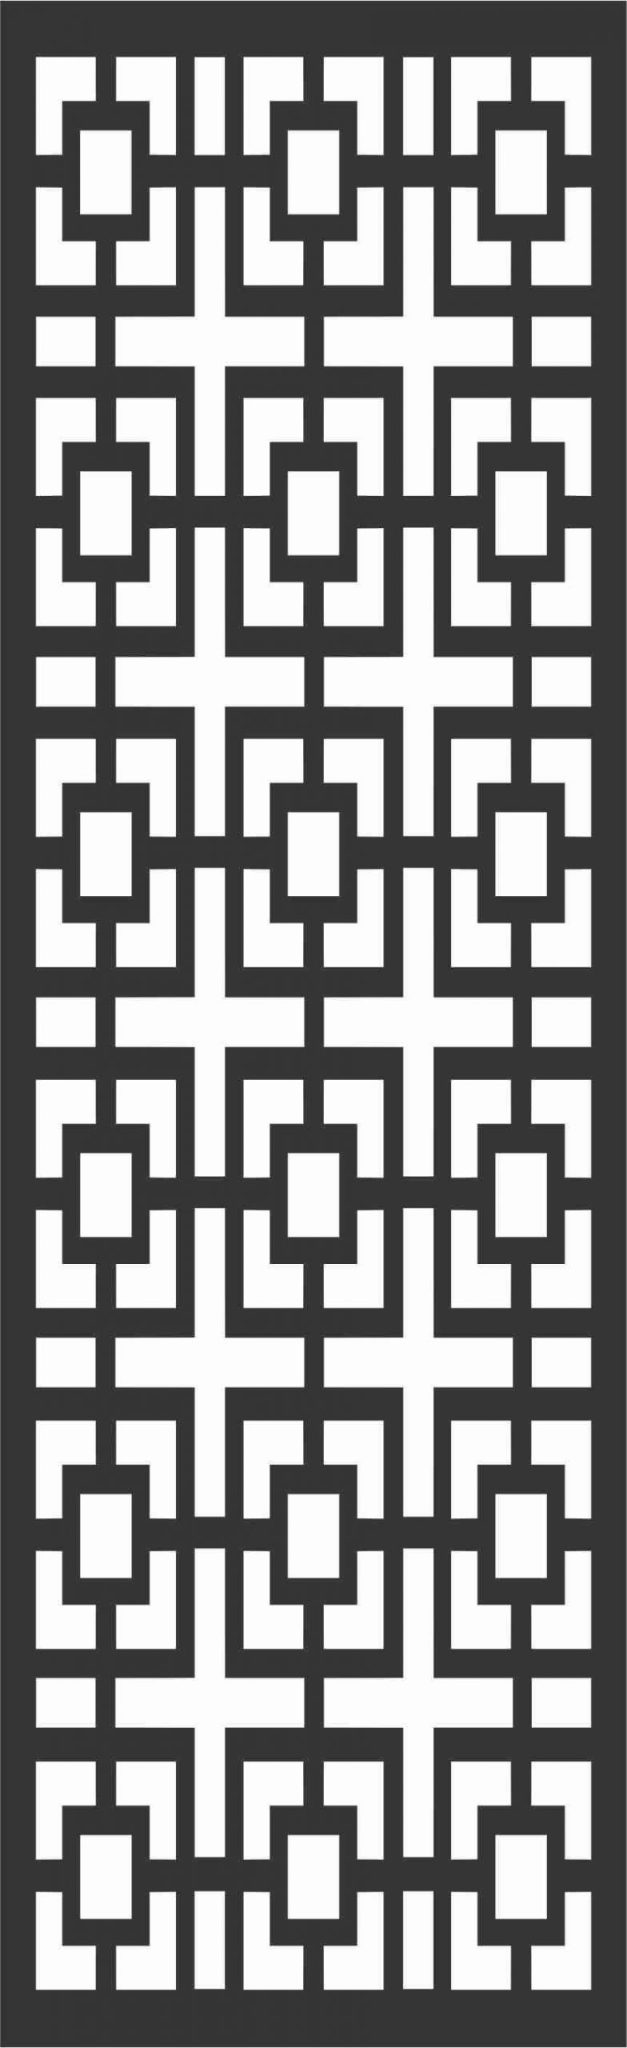 Decorative Screen Patterns For Laser Cutting 172 Free DXF File